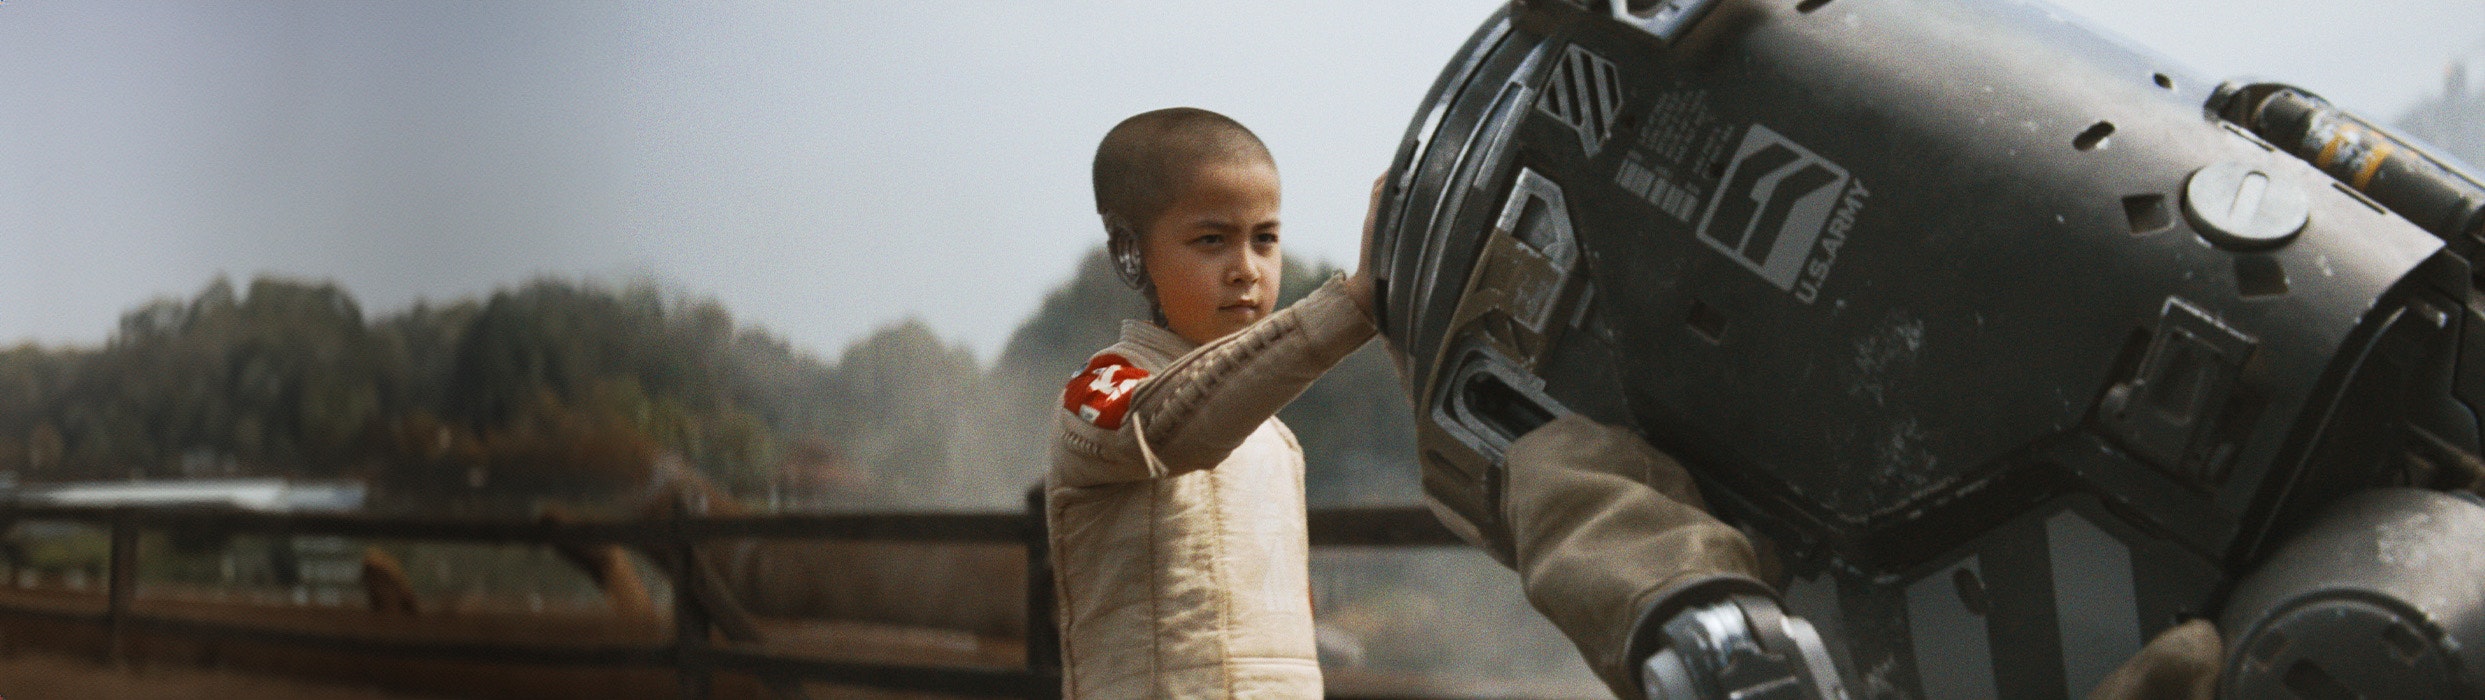 Half human half boy child touches robot with hand in The Creator now showing at Harkins! Get your tickets today!